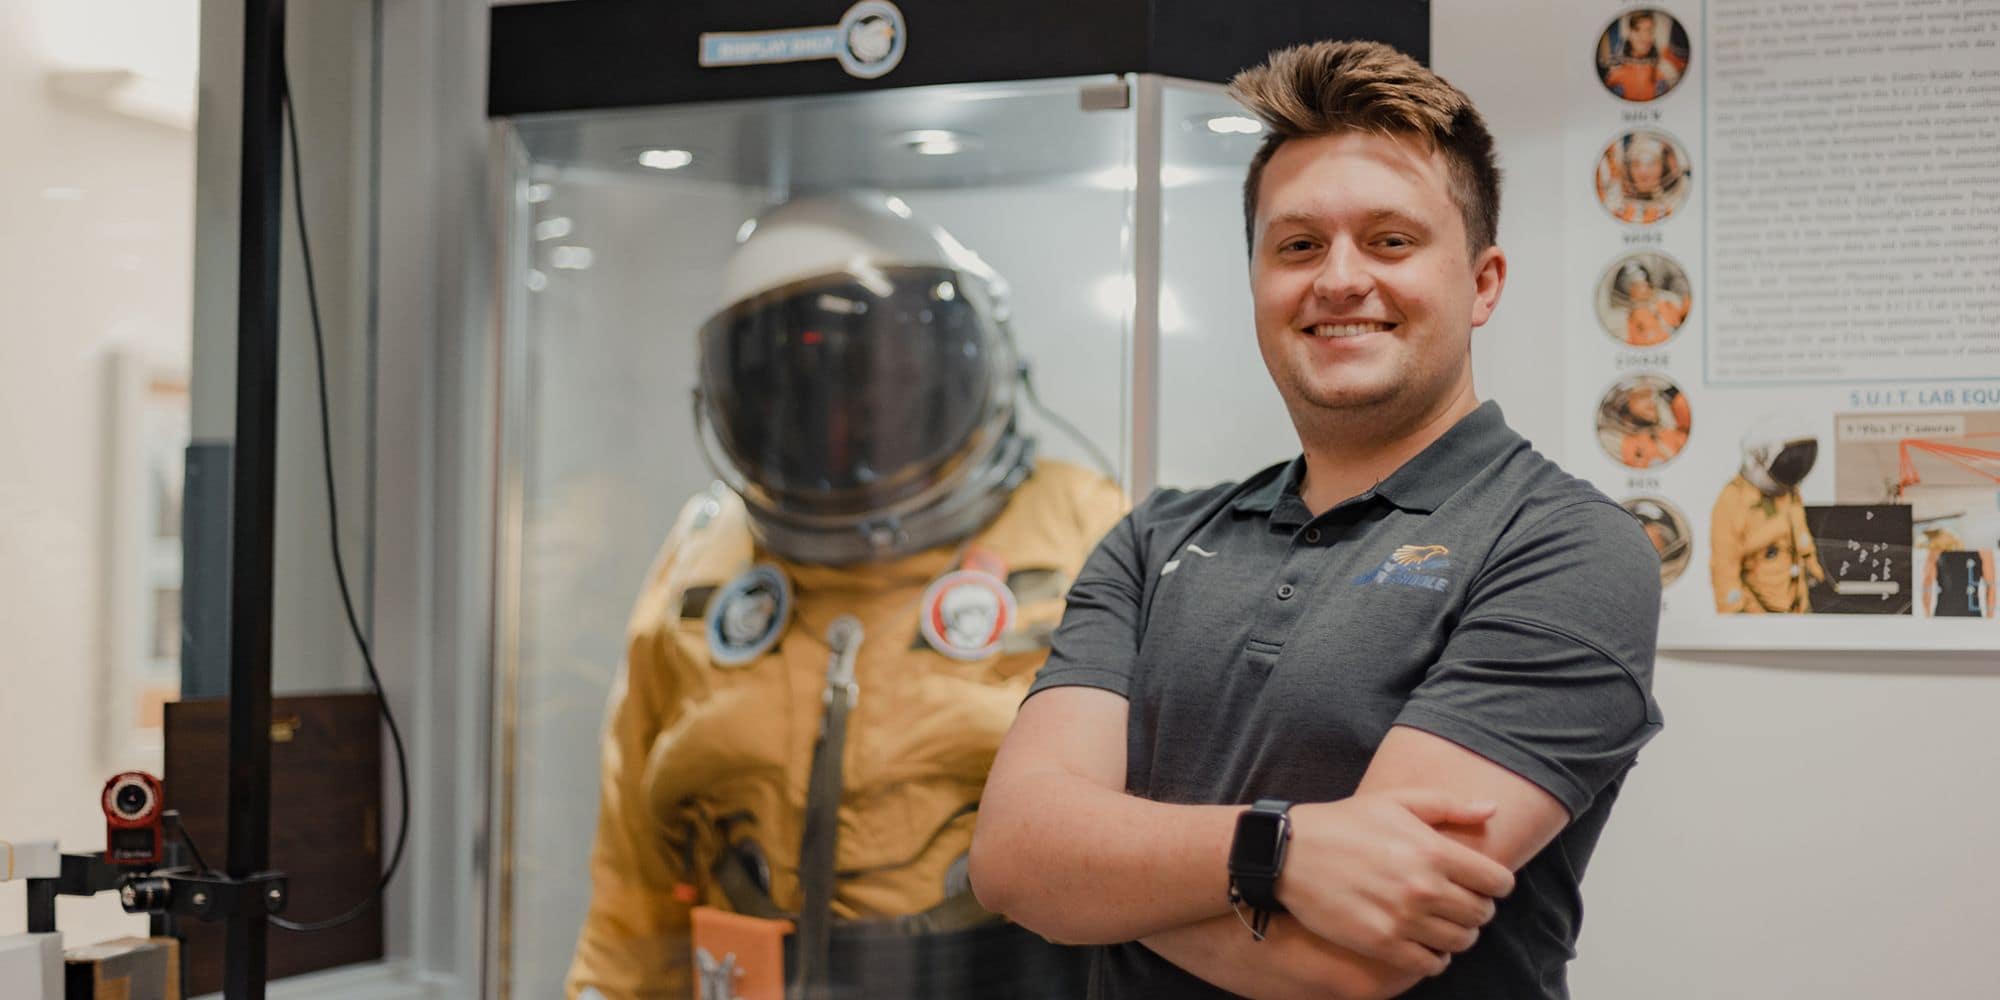 Niko Blanks, seen here next to a space suit, is pursuing a B.S. in Spaceflight Operations with minors in Human Factors and Systems Engineering. (Photo: Josh Asiaten)